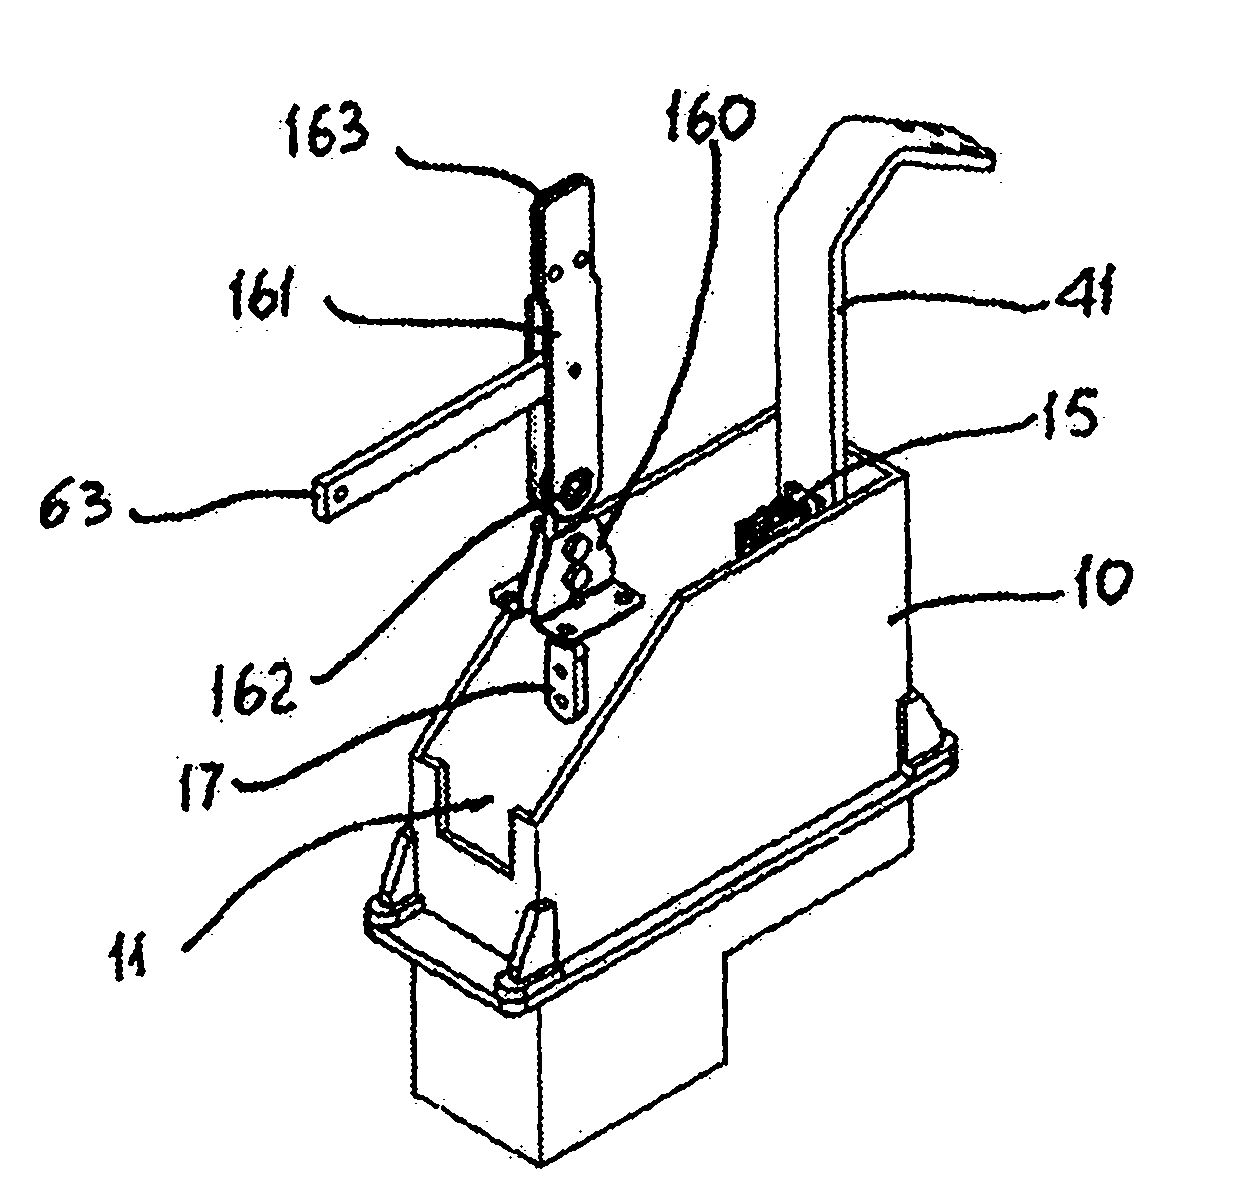 Three-positions disconnector for medium voltage panels